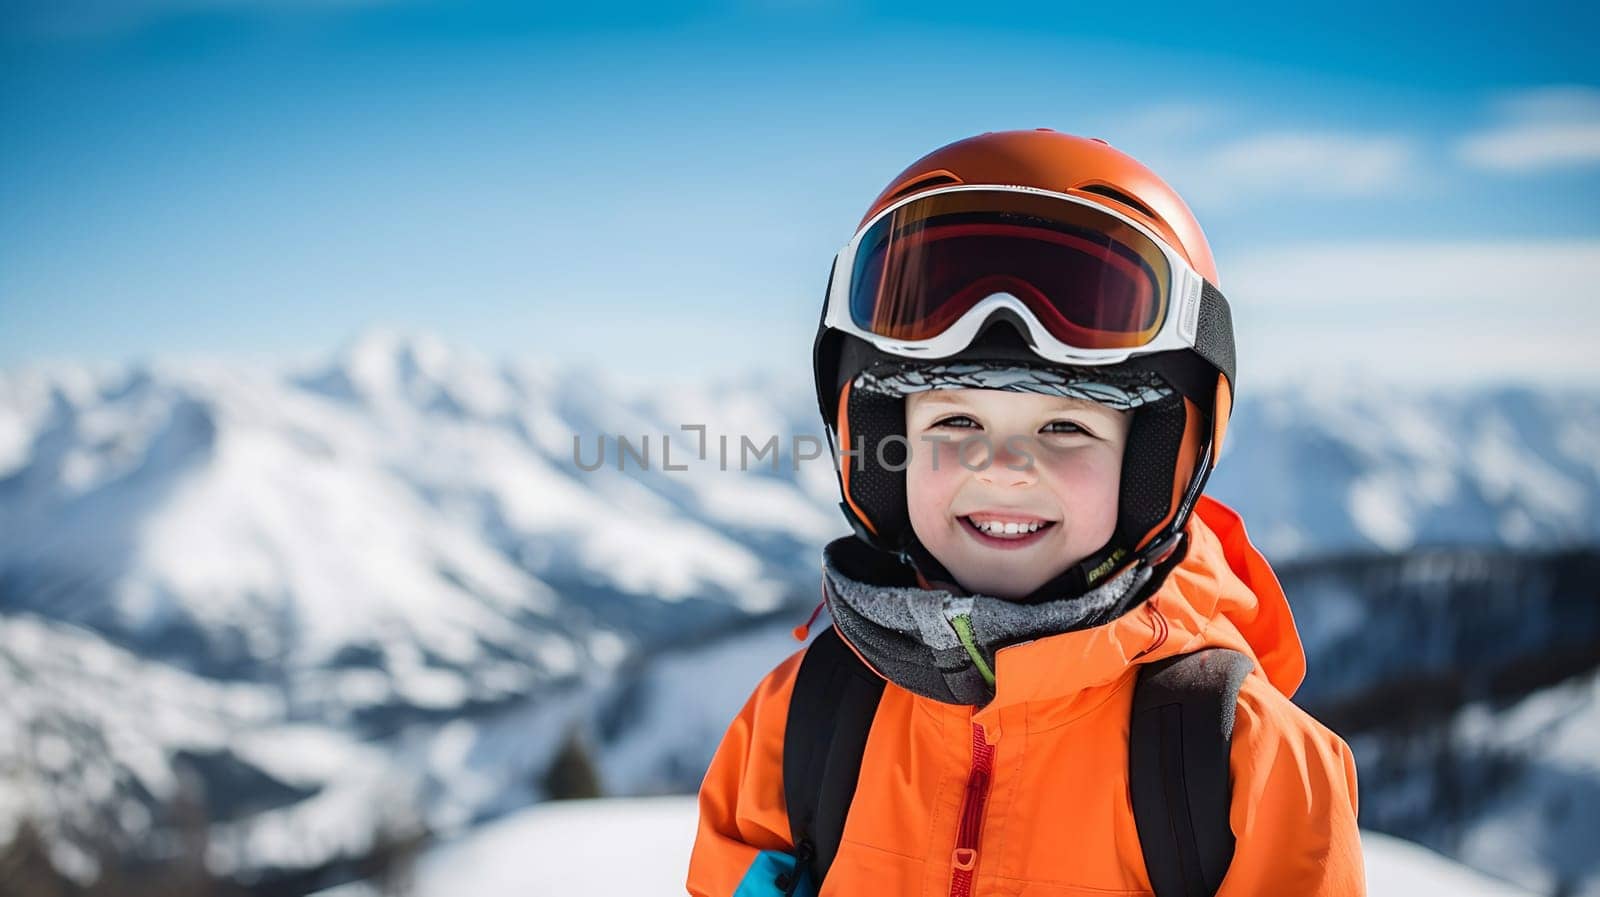 Portrait of a happy, smiling child snowboarder against the backdrop of snow-capped mountains at a ski resort, during the winter holidays. by Alla_Yurtayeva